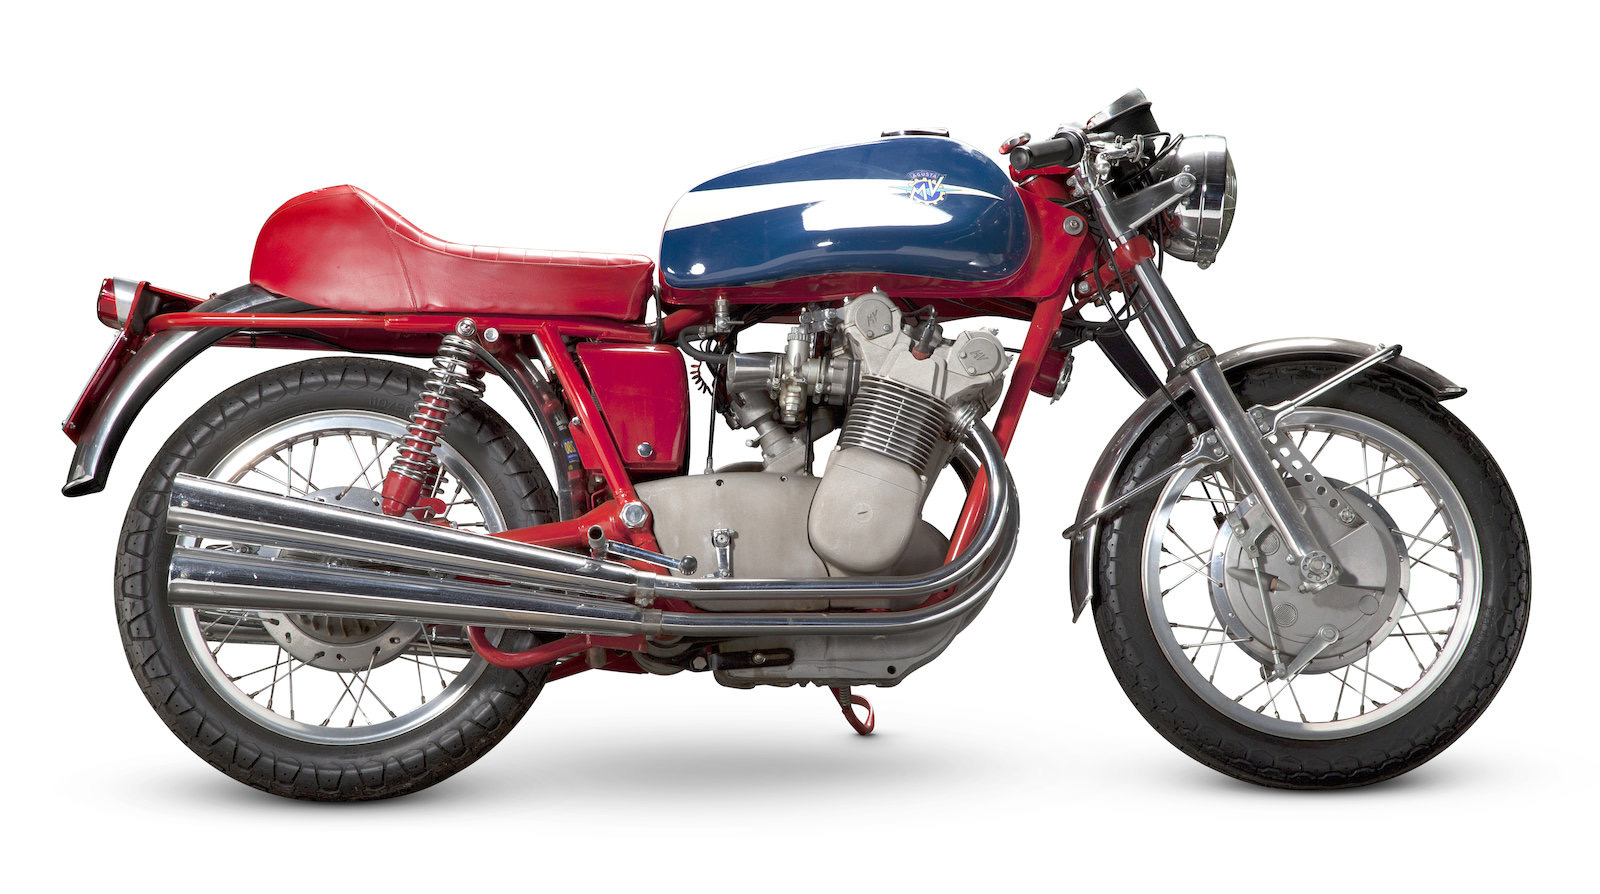 Motorcycles, Bonhams offers 74 motorcycles from single collector at British auction, ClassicCars.com Journal